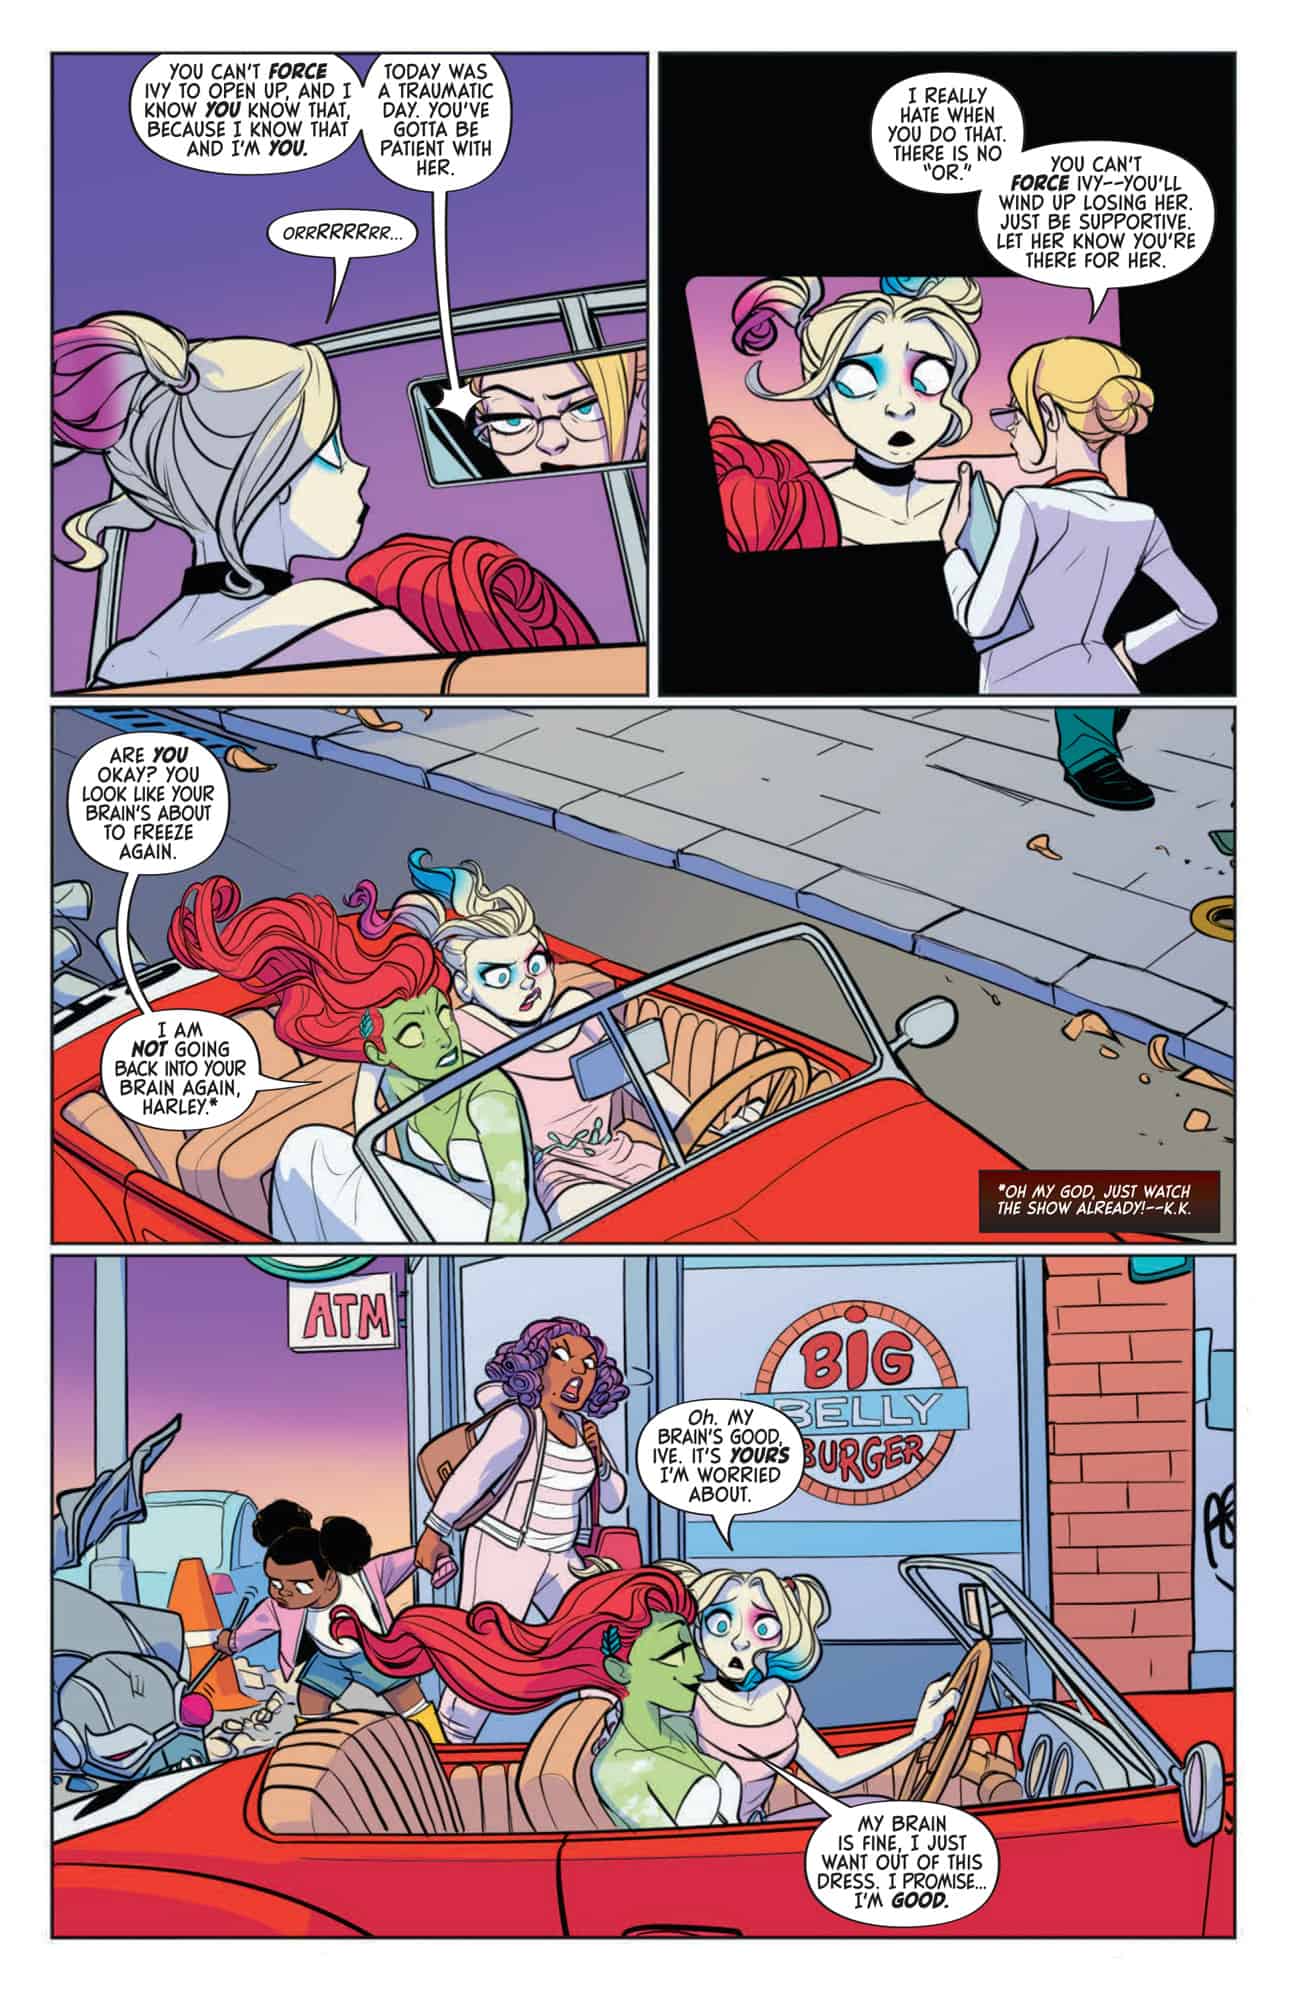 Harley looks into the mirror above the dashboard and sees herself as Doctor Harleen Quinzel, the psychiatrist she once was. Her psychiatrist self gives her a short lecture on how to best talk to Ivy and keep Ivy from shutting her out completely. The car passes a burger joint. Harley voices her concern for Ivy aloud after Ivy notices Harley seems lost in thought. Both claim to be fine.